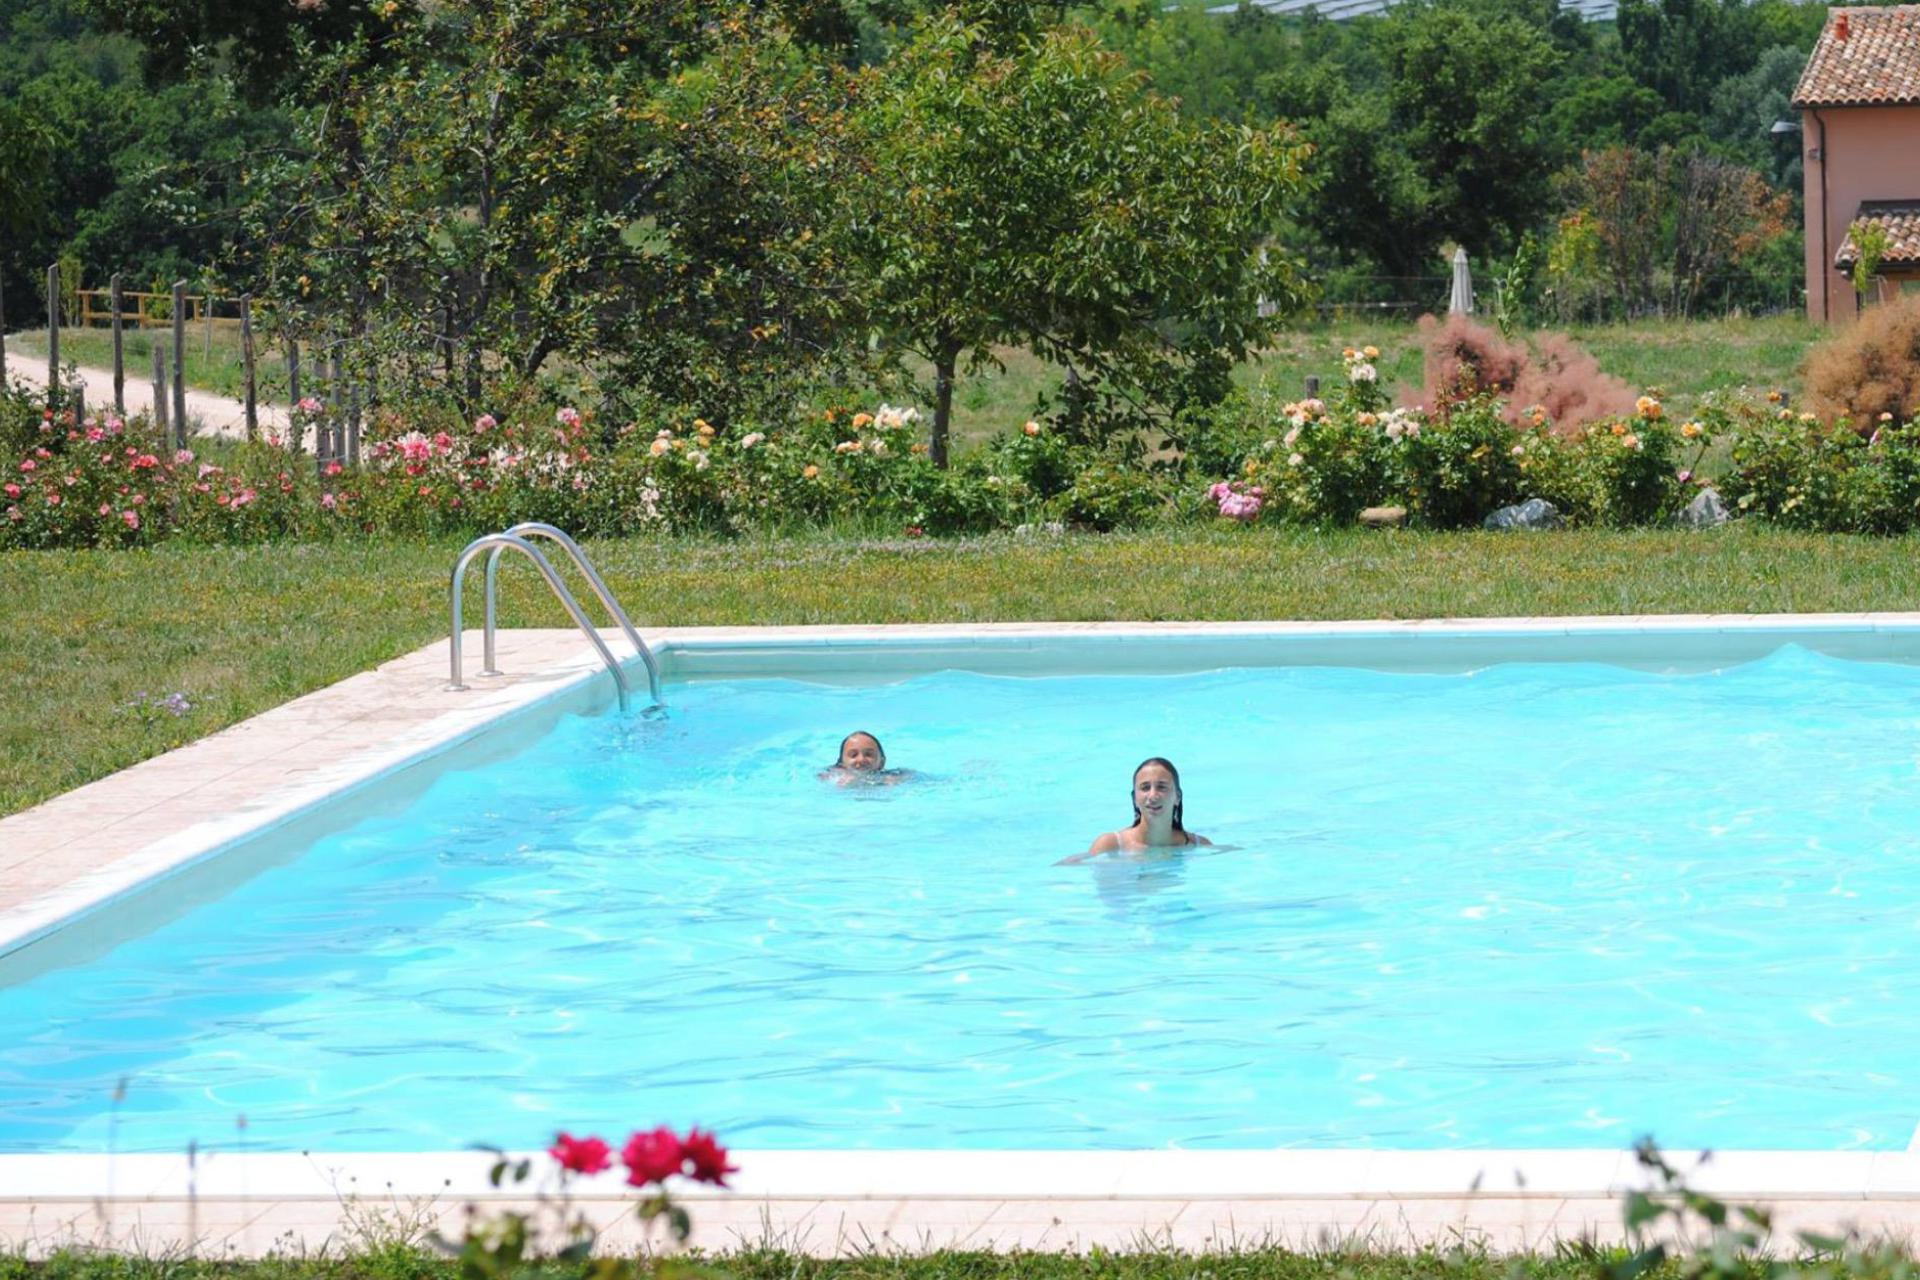 Agriturismo Marche, cozy atmosphere and kid friendly